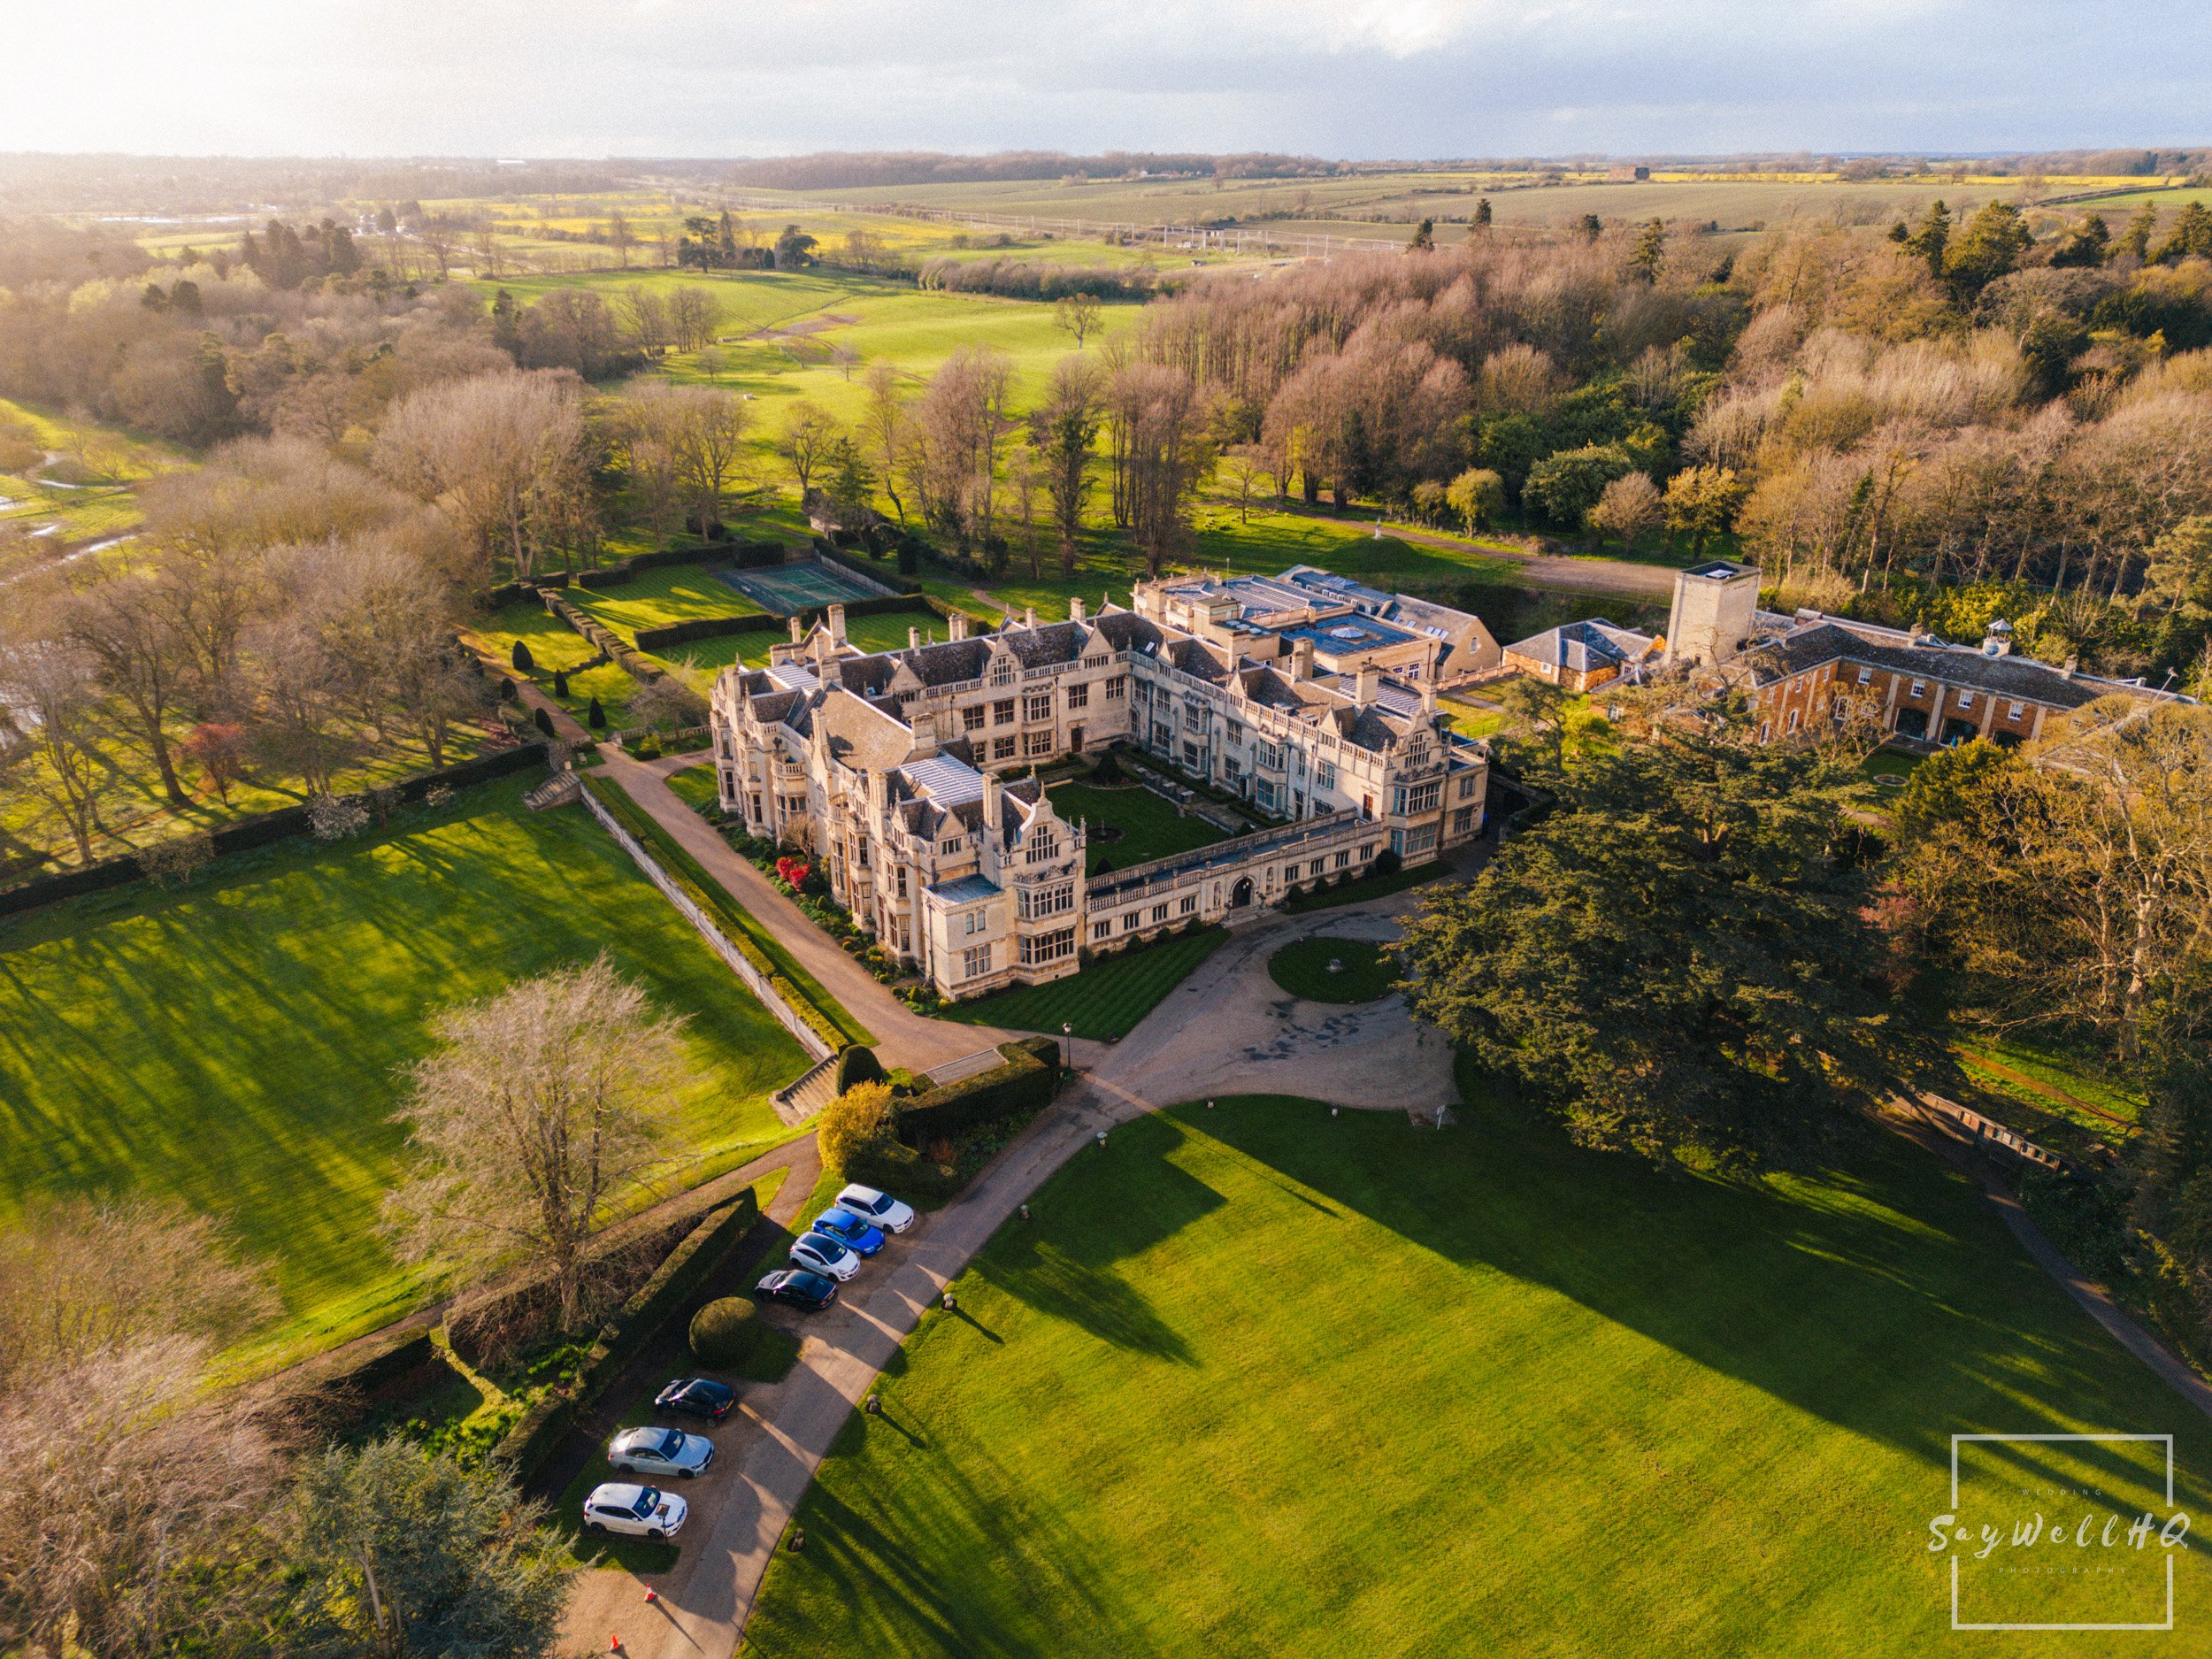 Rushton Hall Wedding Venue Image From a Drone Showing the Grounds and Buildings